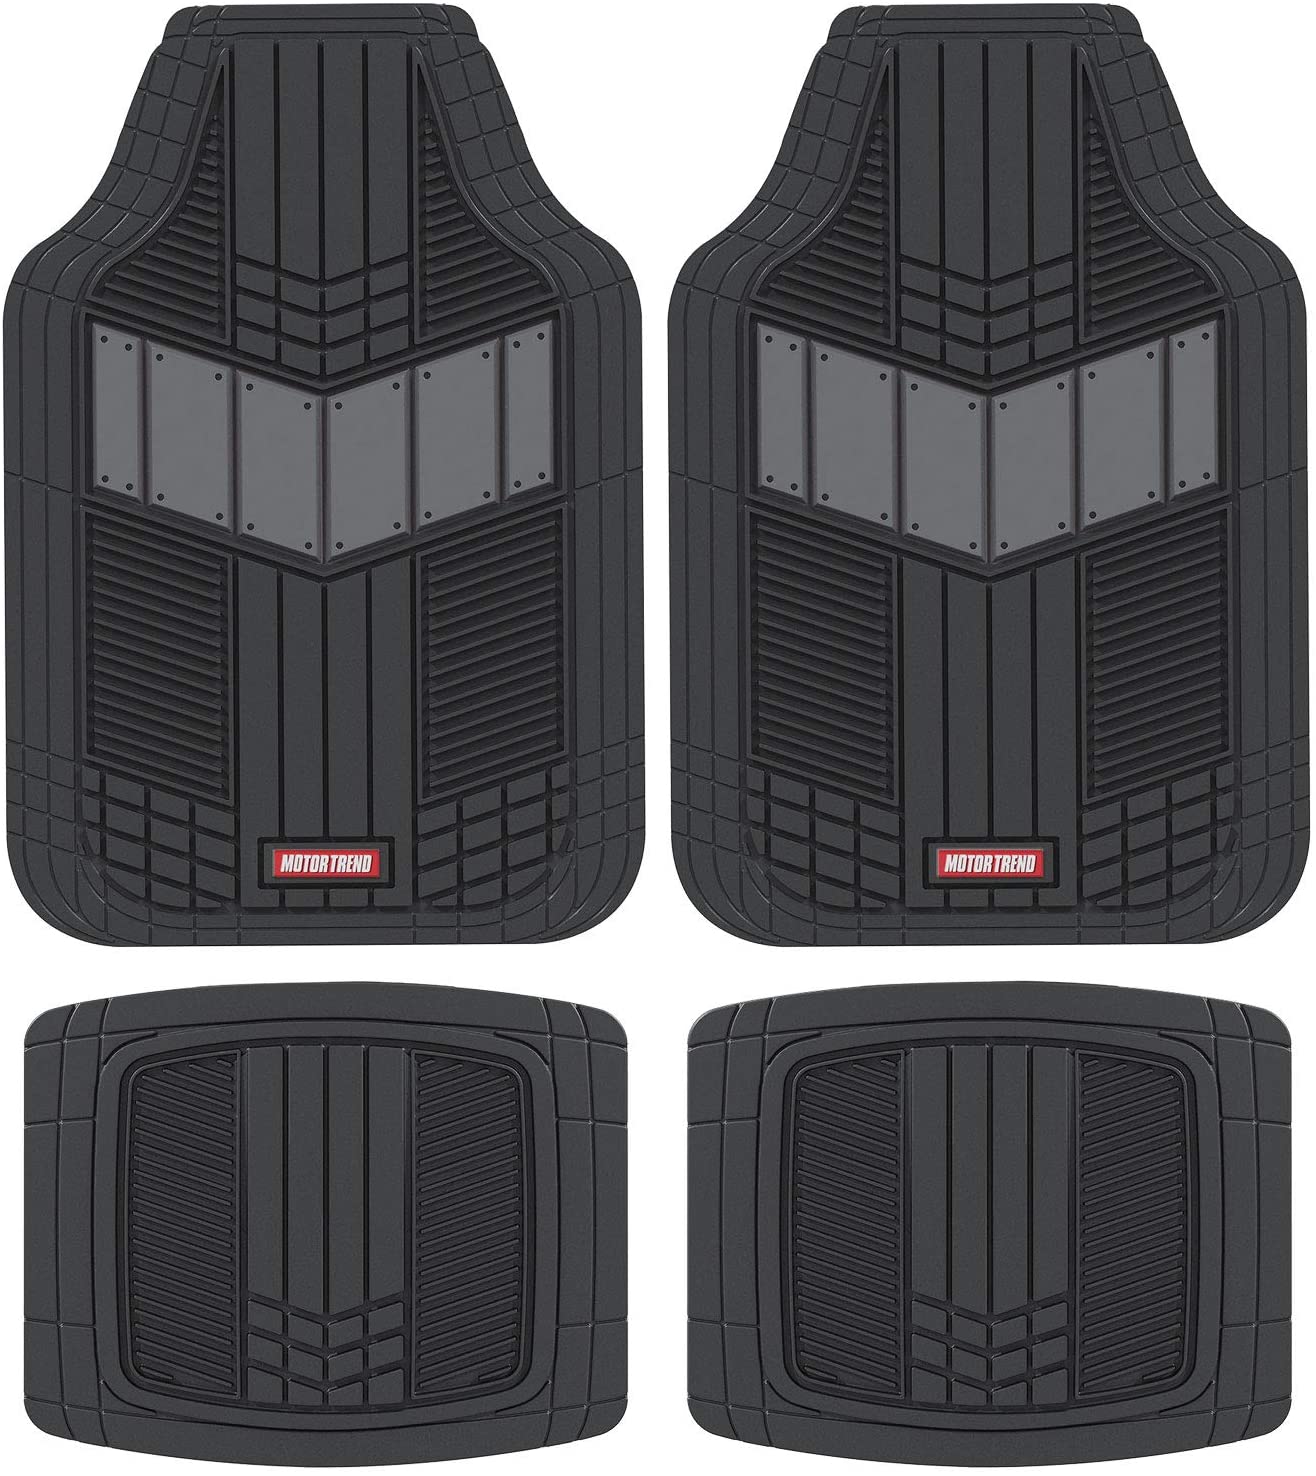 Motor Trend DualFlex Two-Tone Rubber Car Floor Mats for Automotive SUV Van Truck Liners - Channel Drainer All Weather Protection